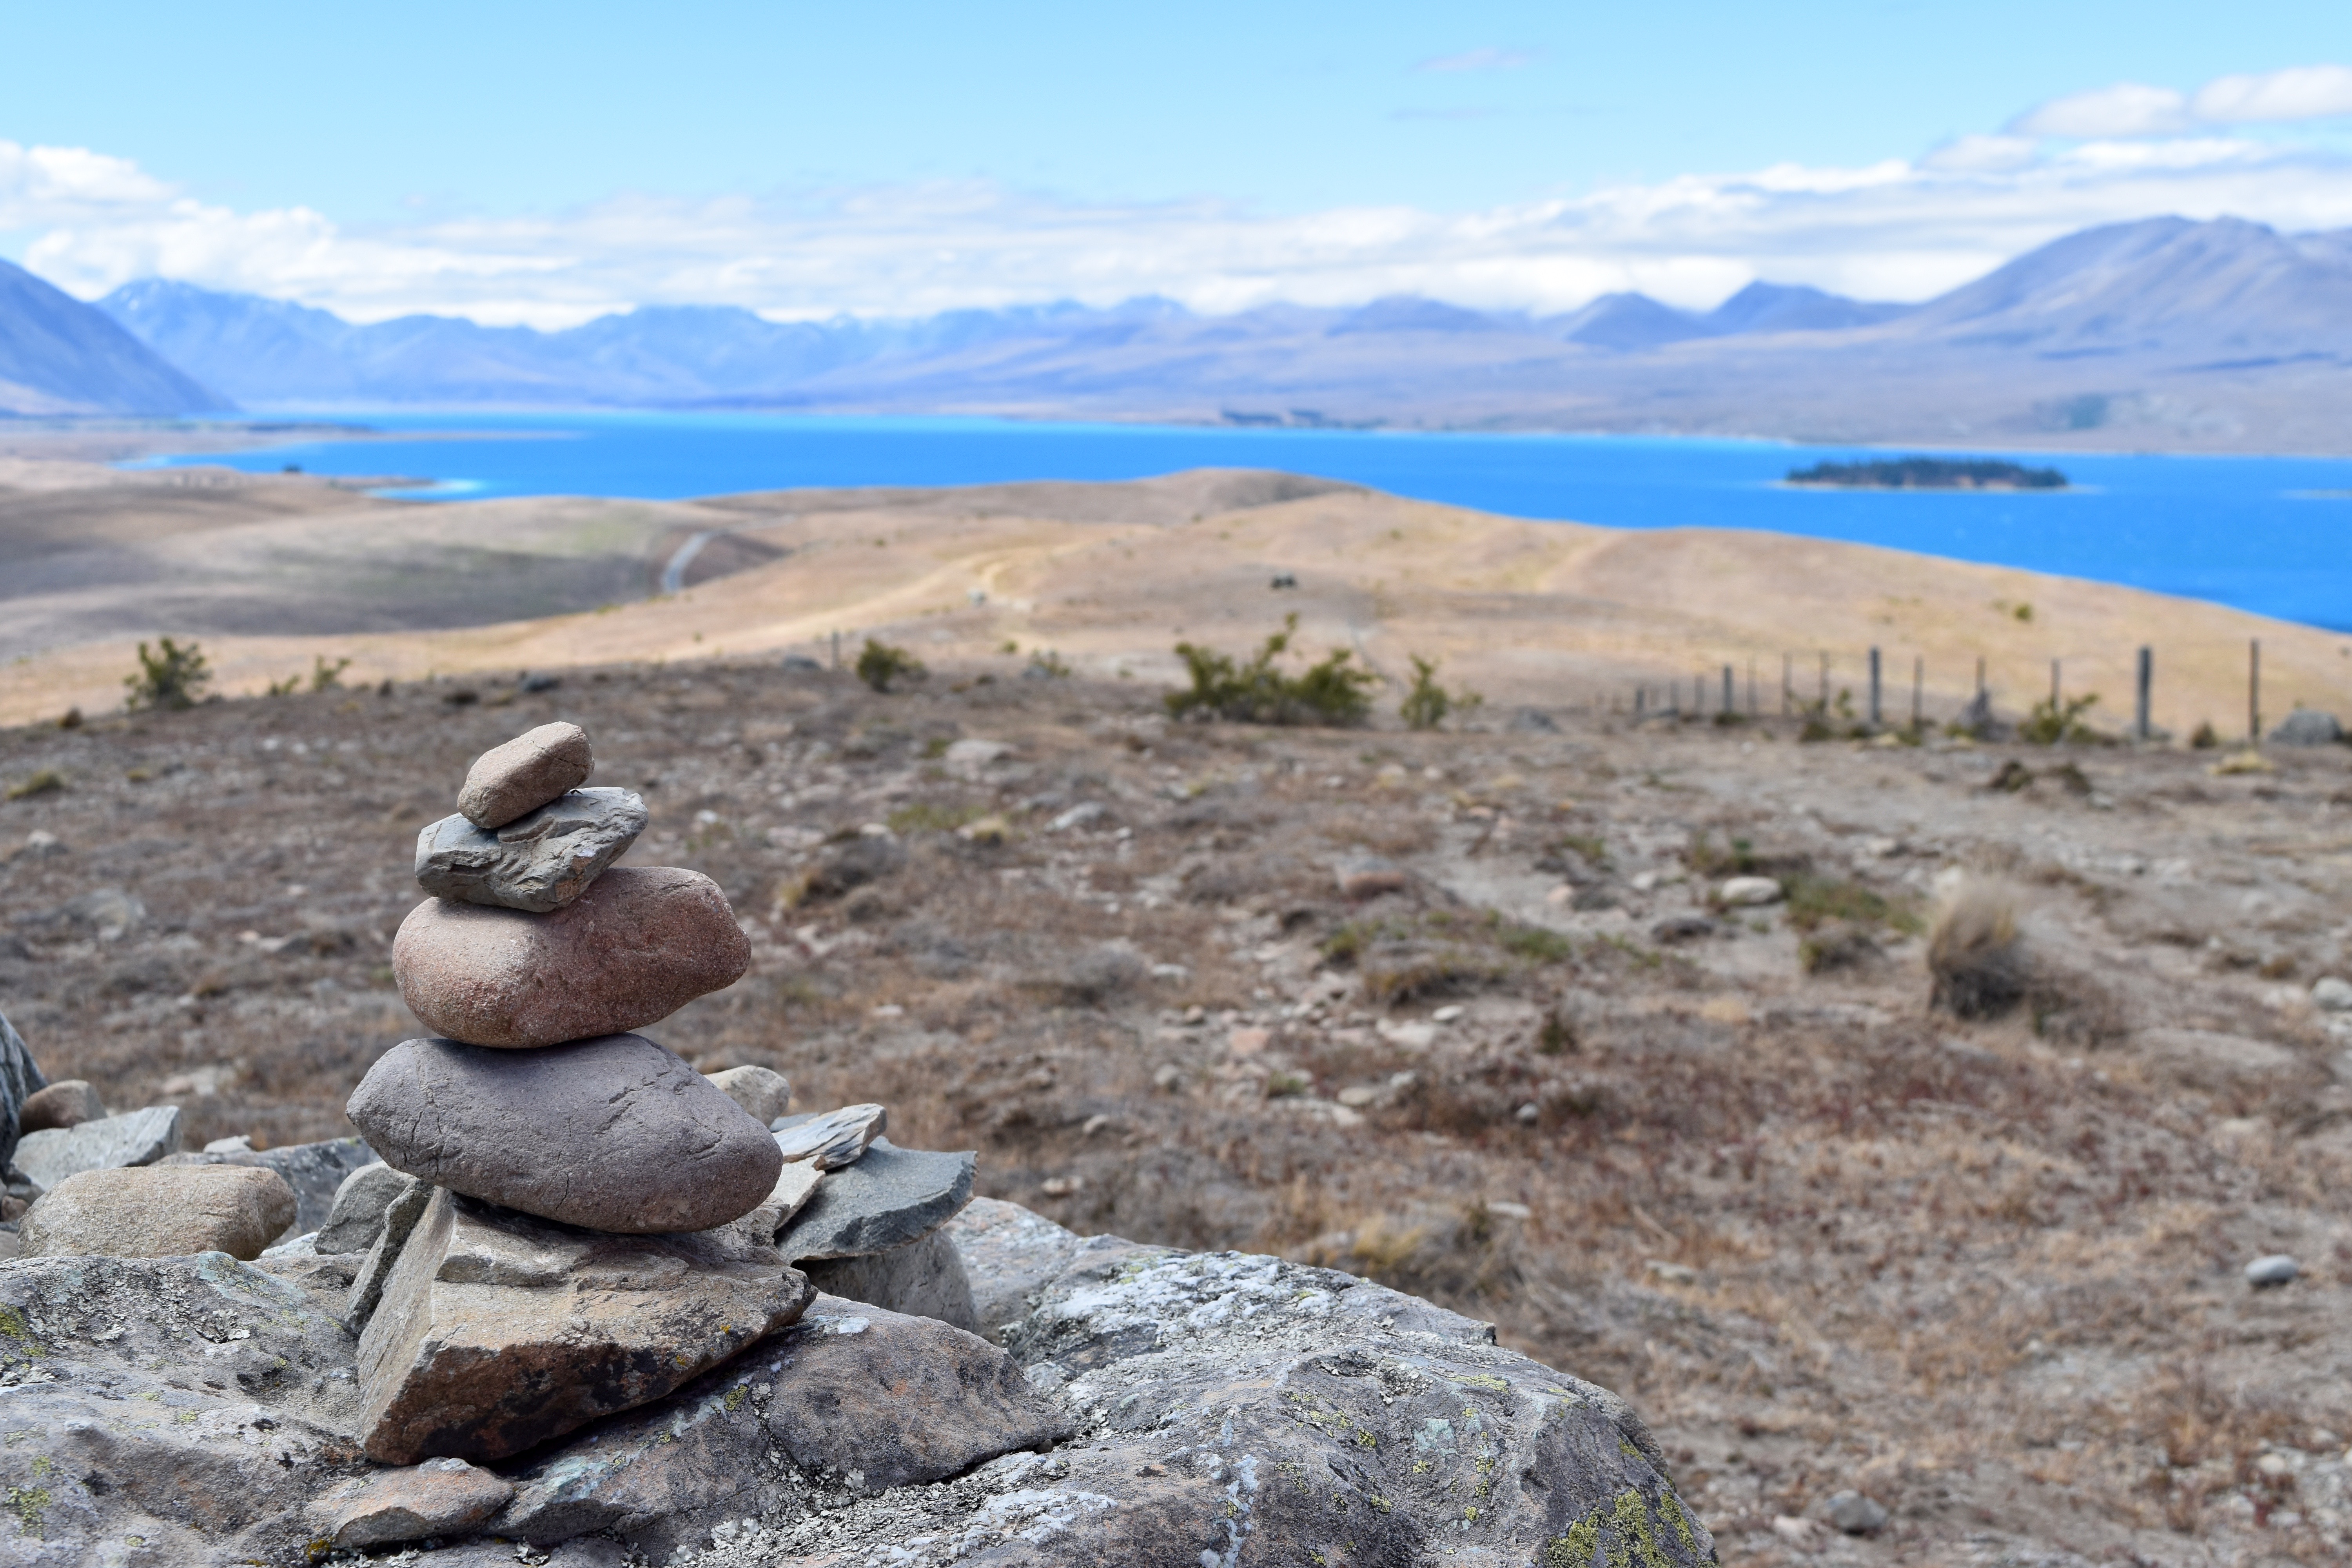 Our footprint may not be permanent, but the lasting effects may be: Lake Tekapo, NZ